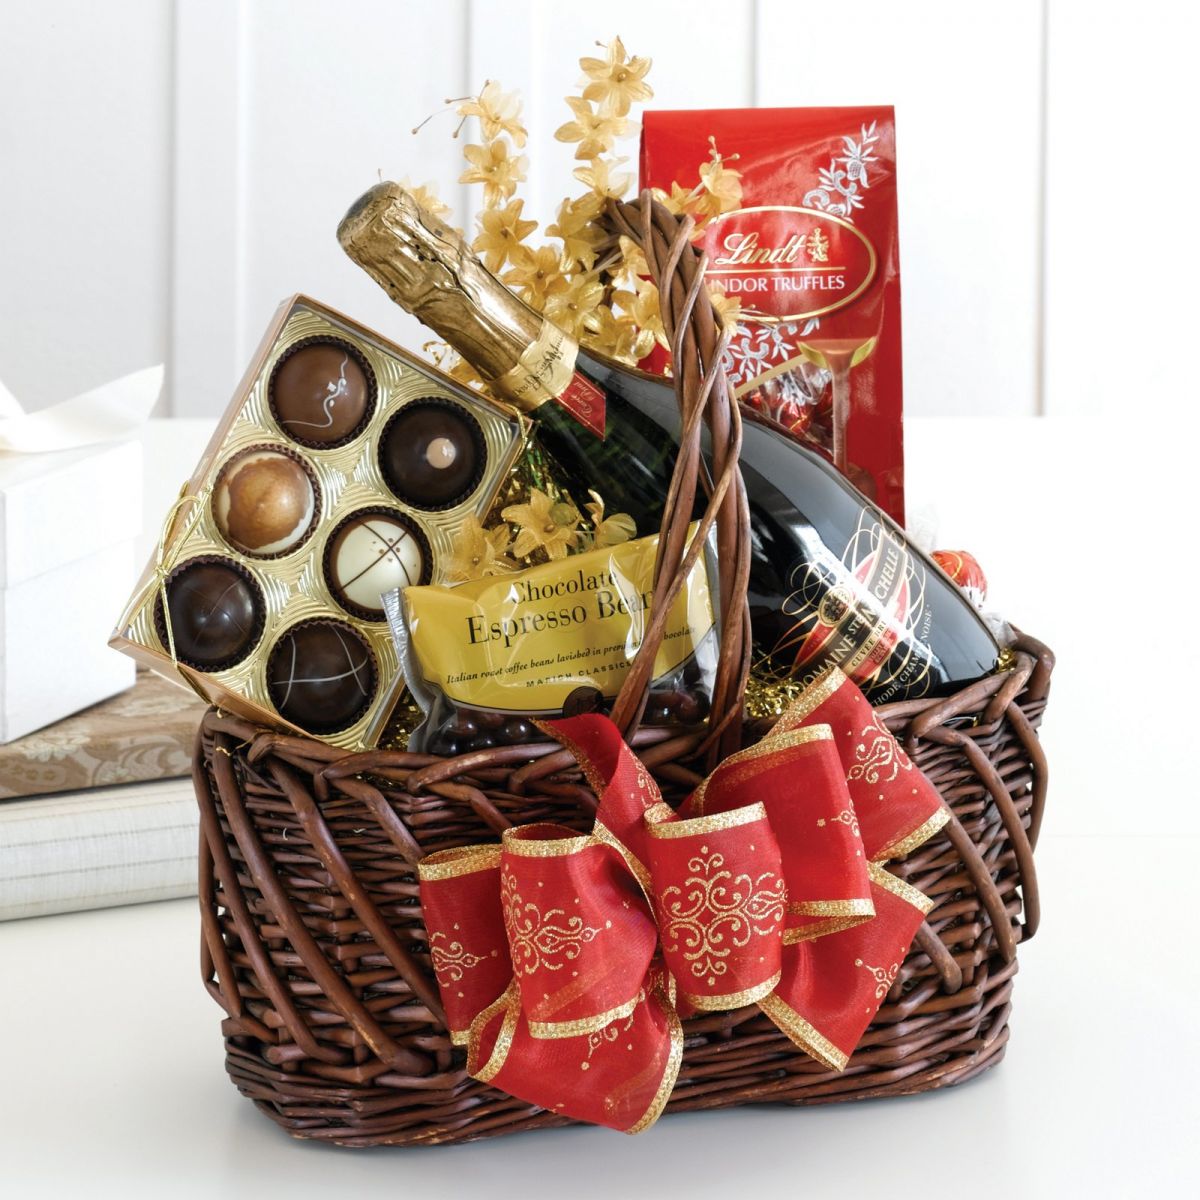 Top 5 Amazing Gift Basket Ideas That You'll Love | Cool ...